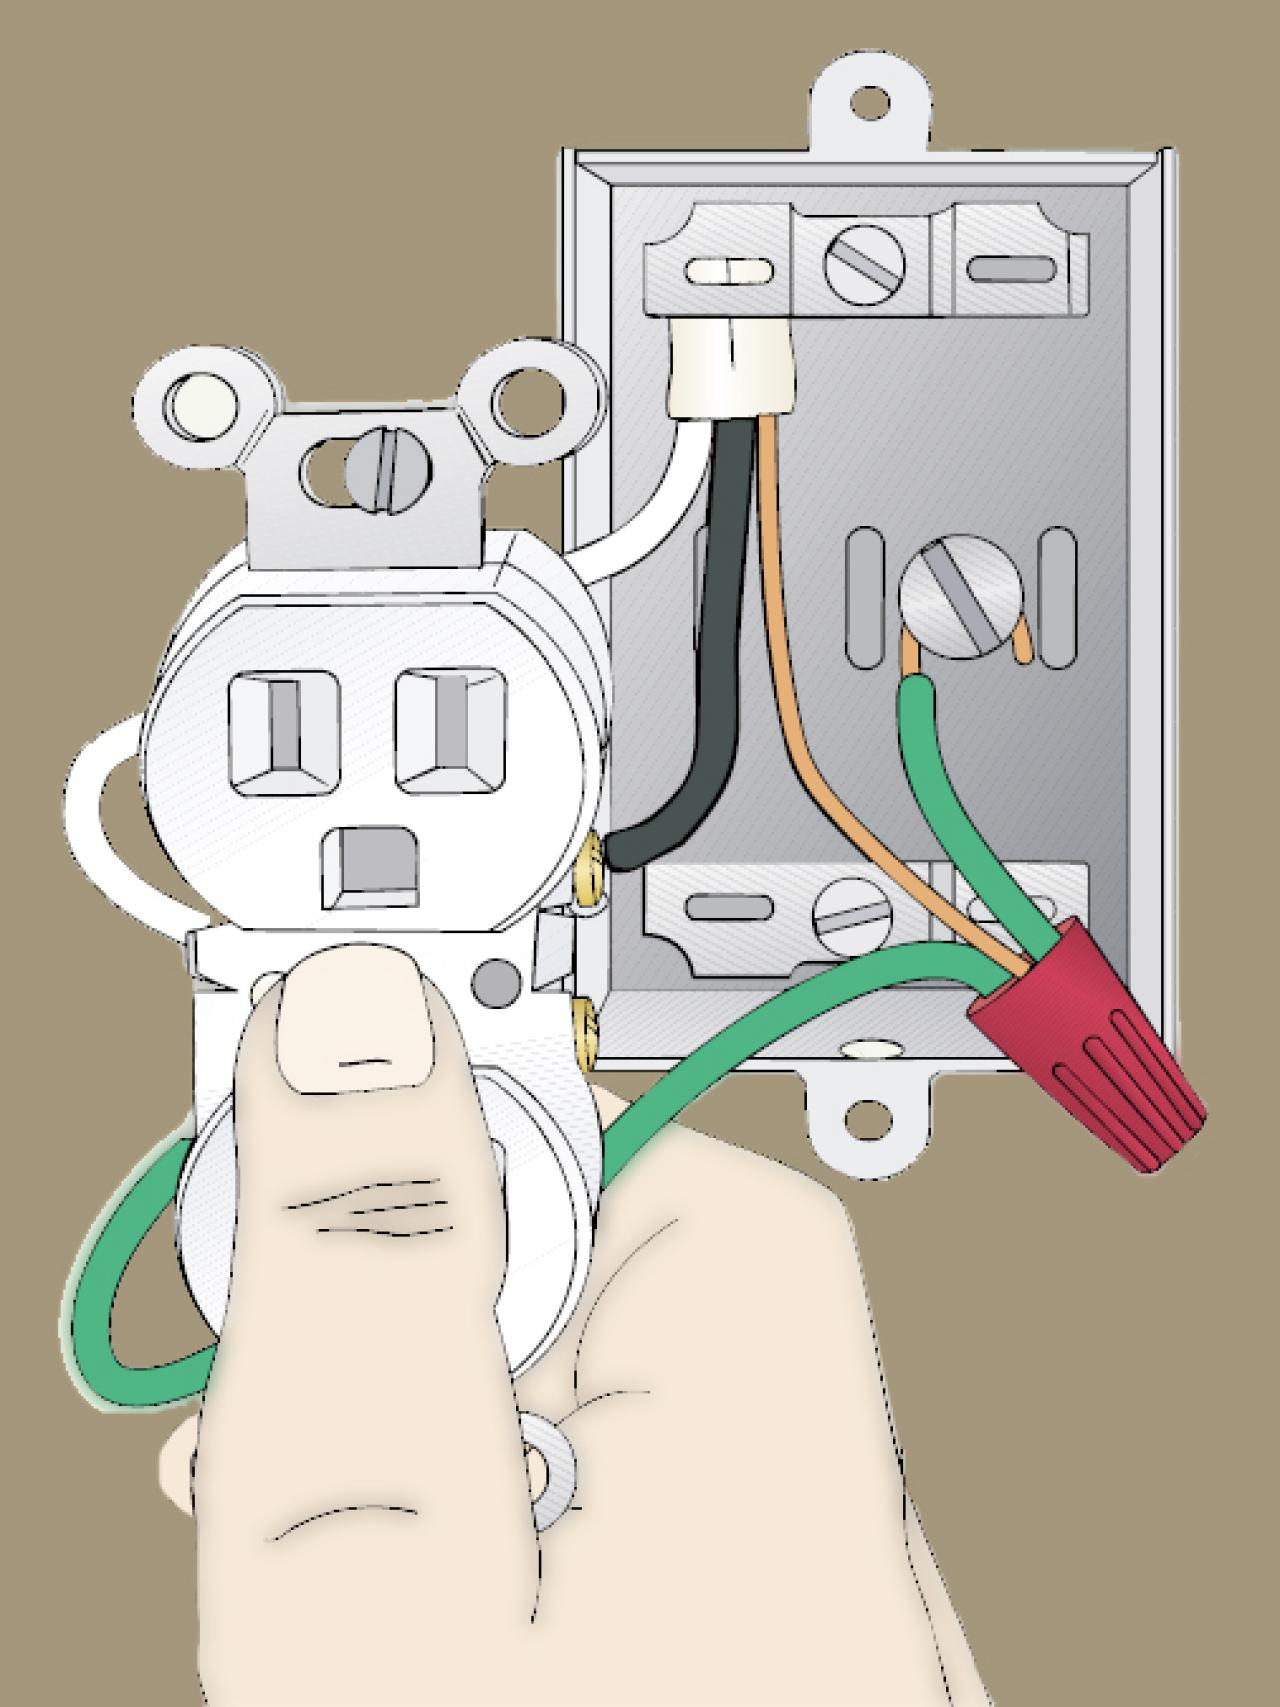 The Diffe Colored Electrical Wires, How To Identify Old House Wiring